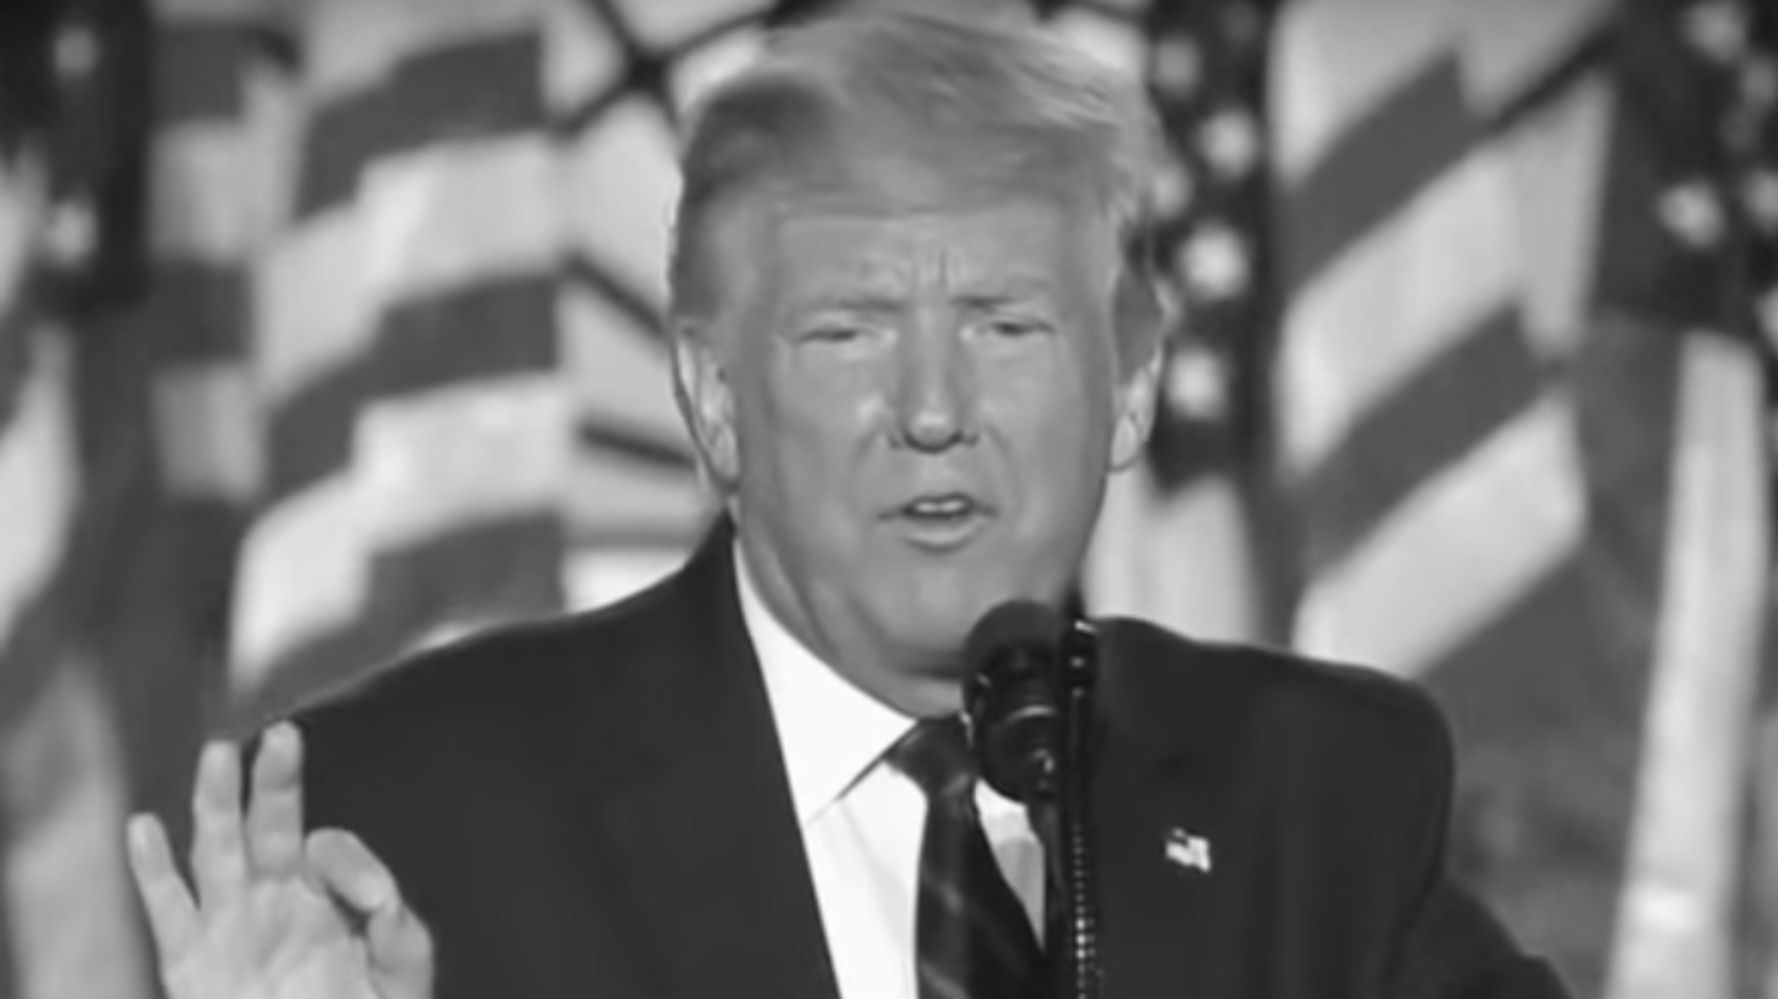 Donald Trump's Fascism On Full Display In Chilling New Ad